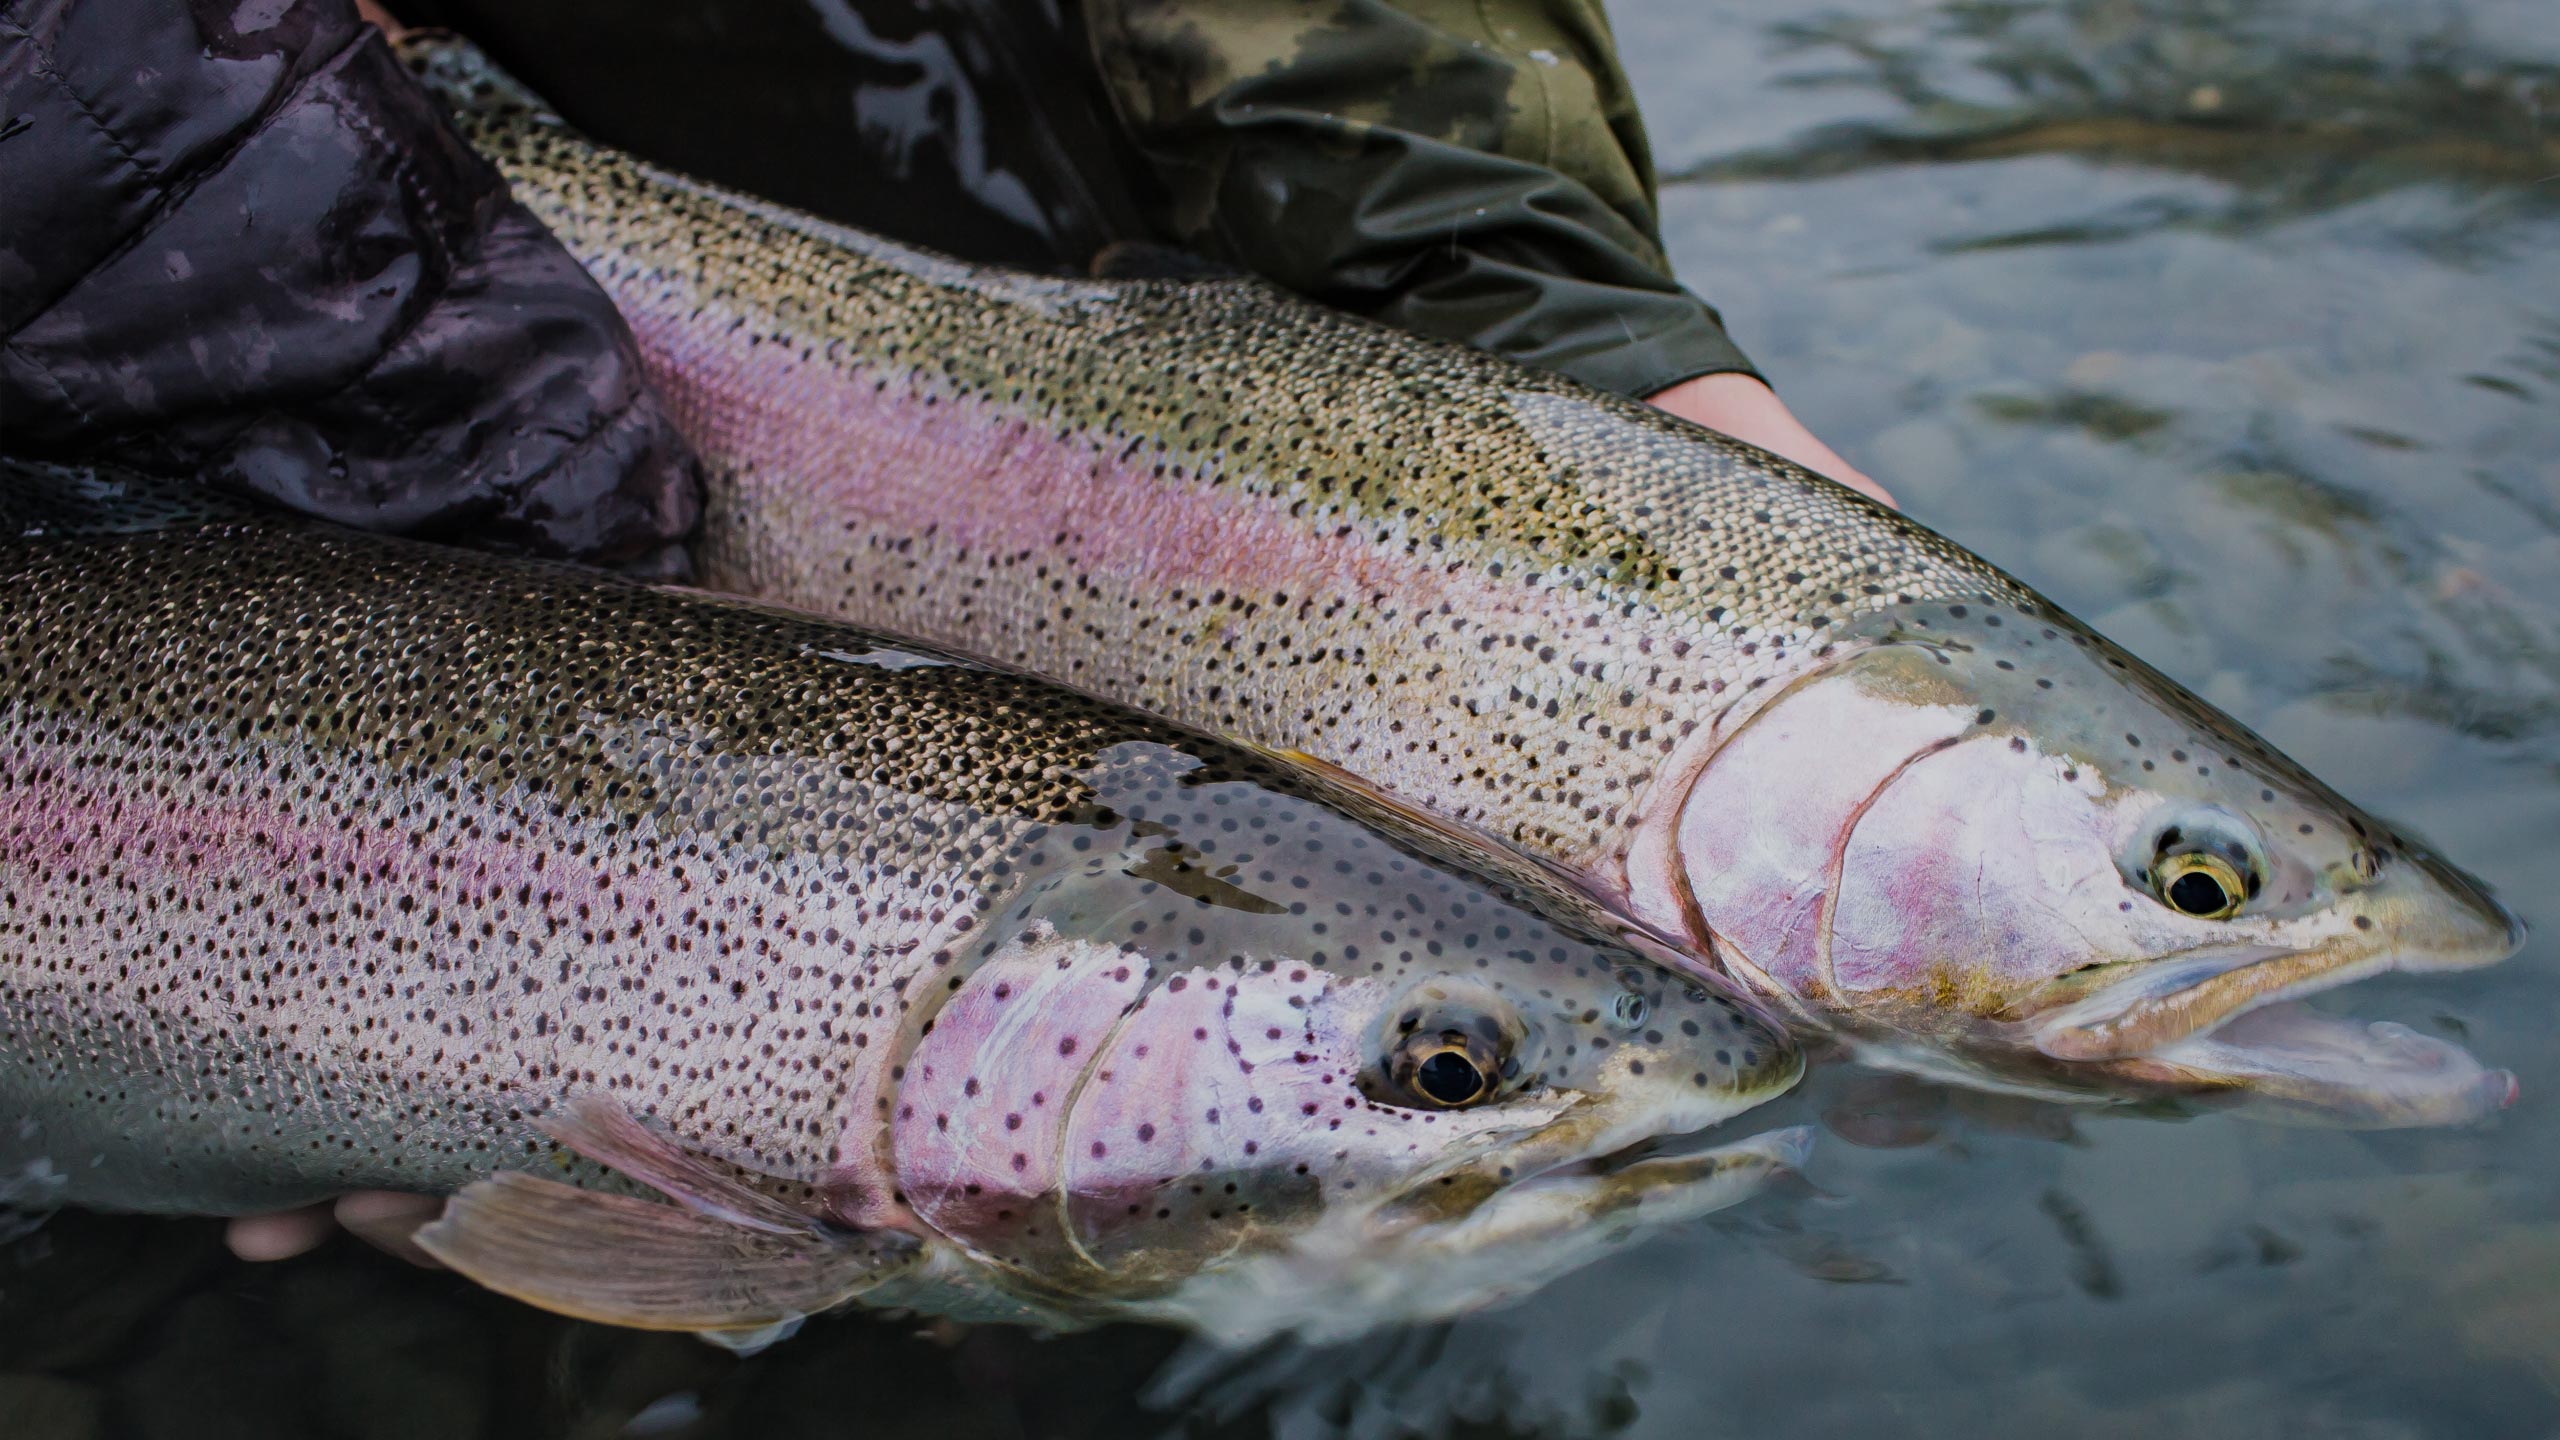 fly fishing guided trips in alaska